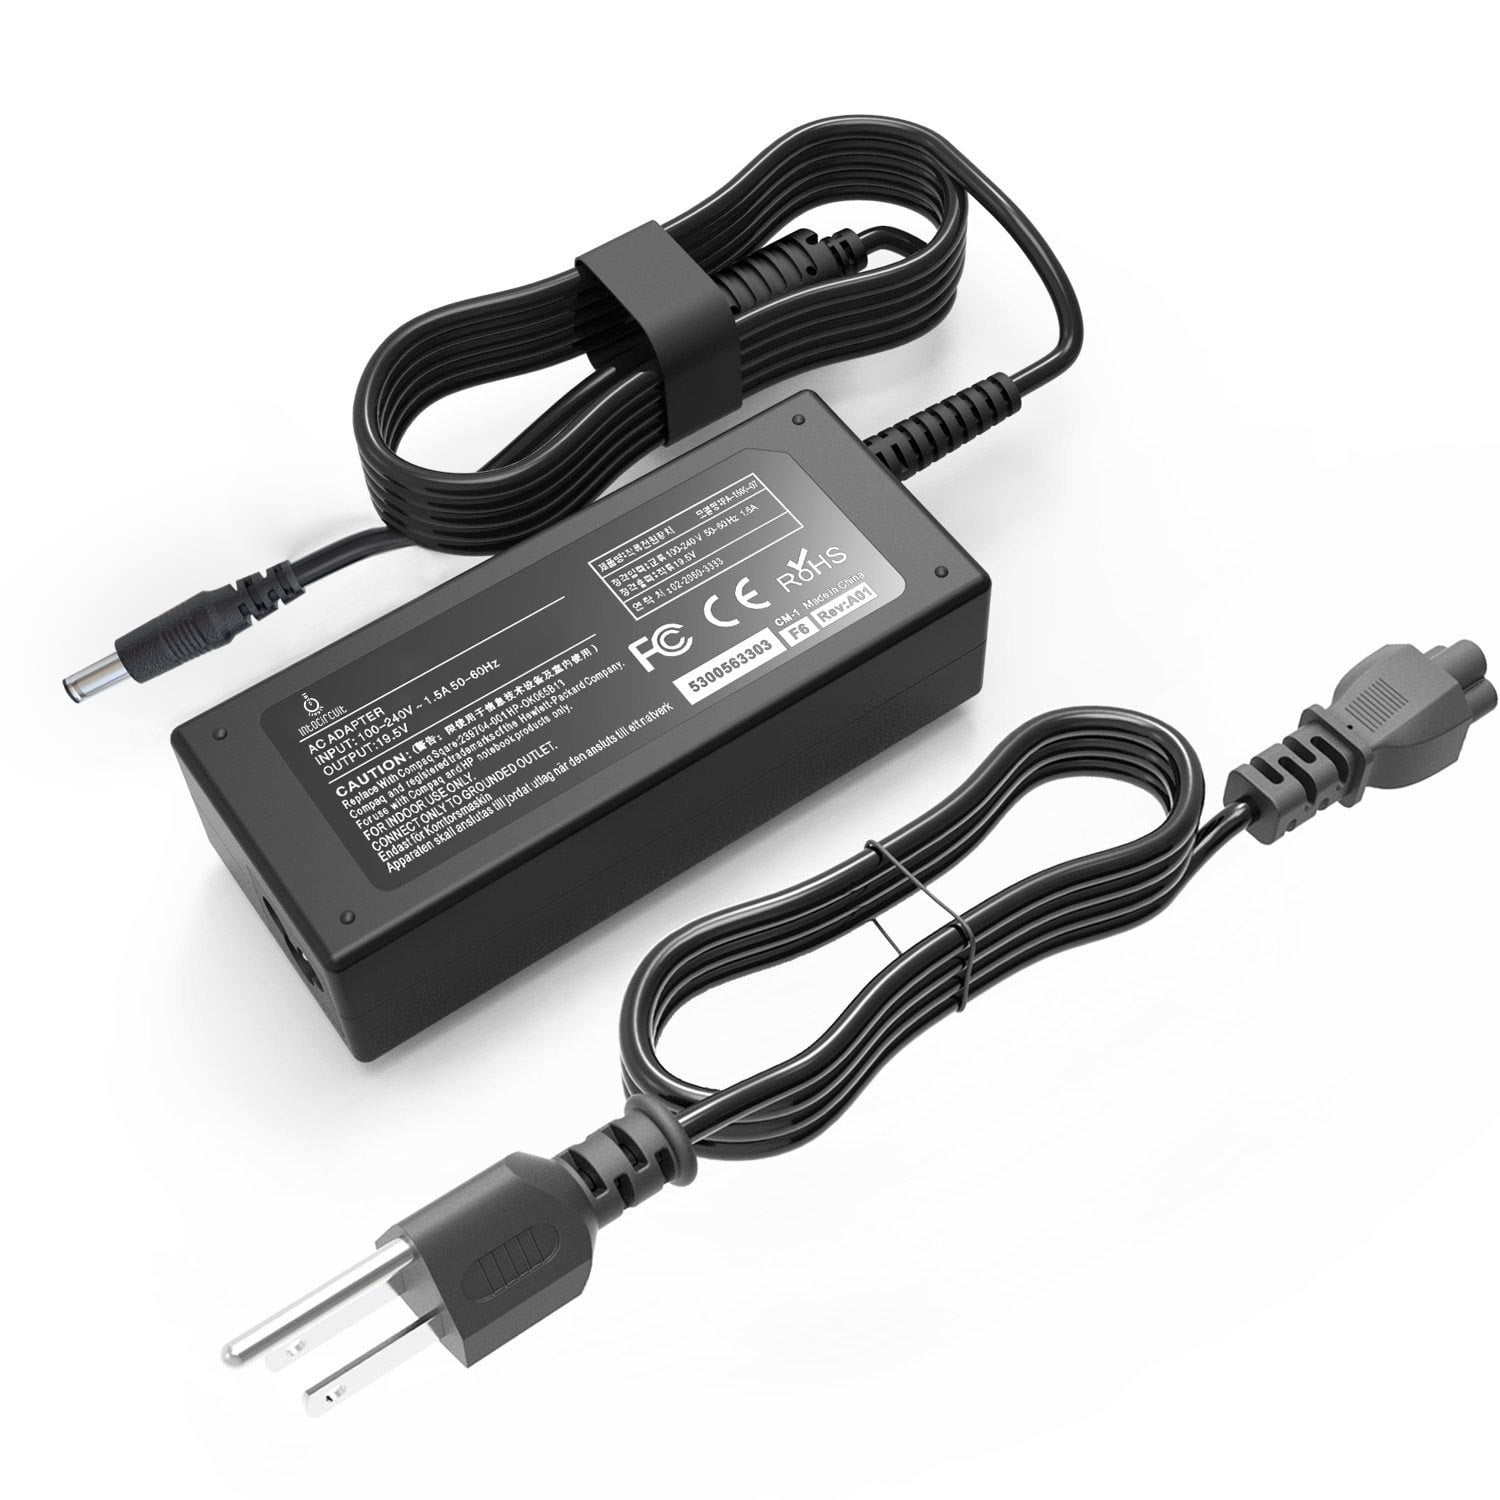 Dell Latitude 13 3379 Charger By Intocircuit© 